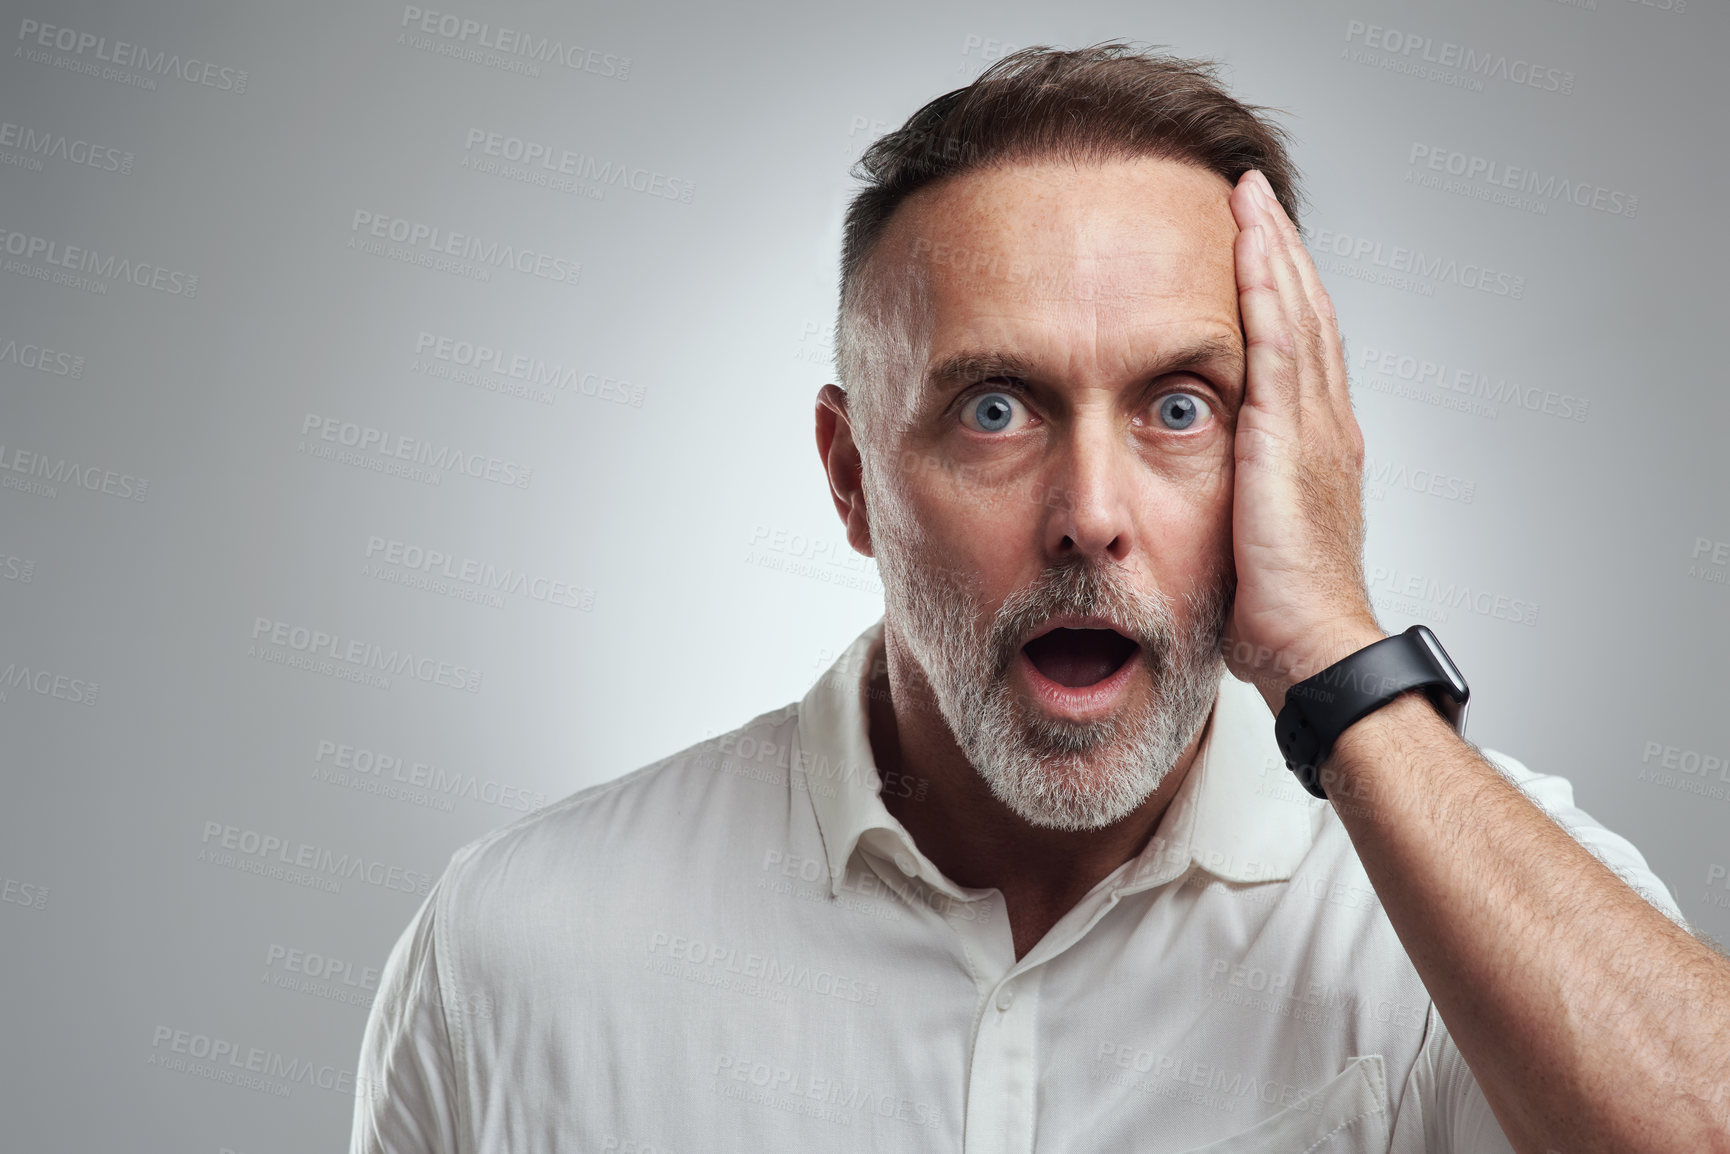 Buy stock photo Studio portrait of a mature man looking surprised against a grey background